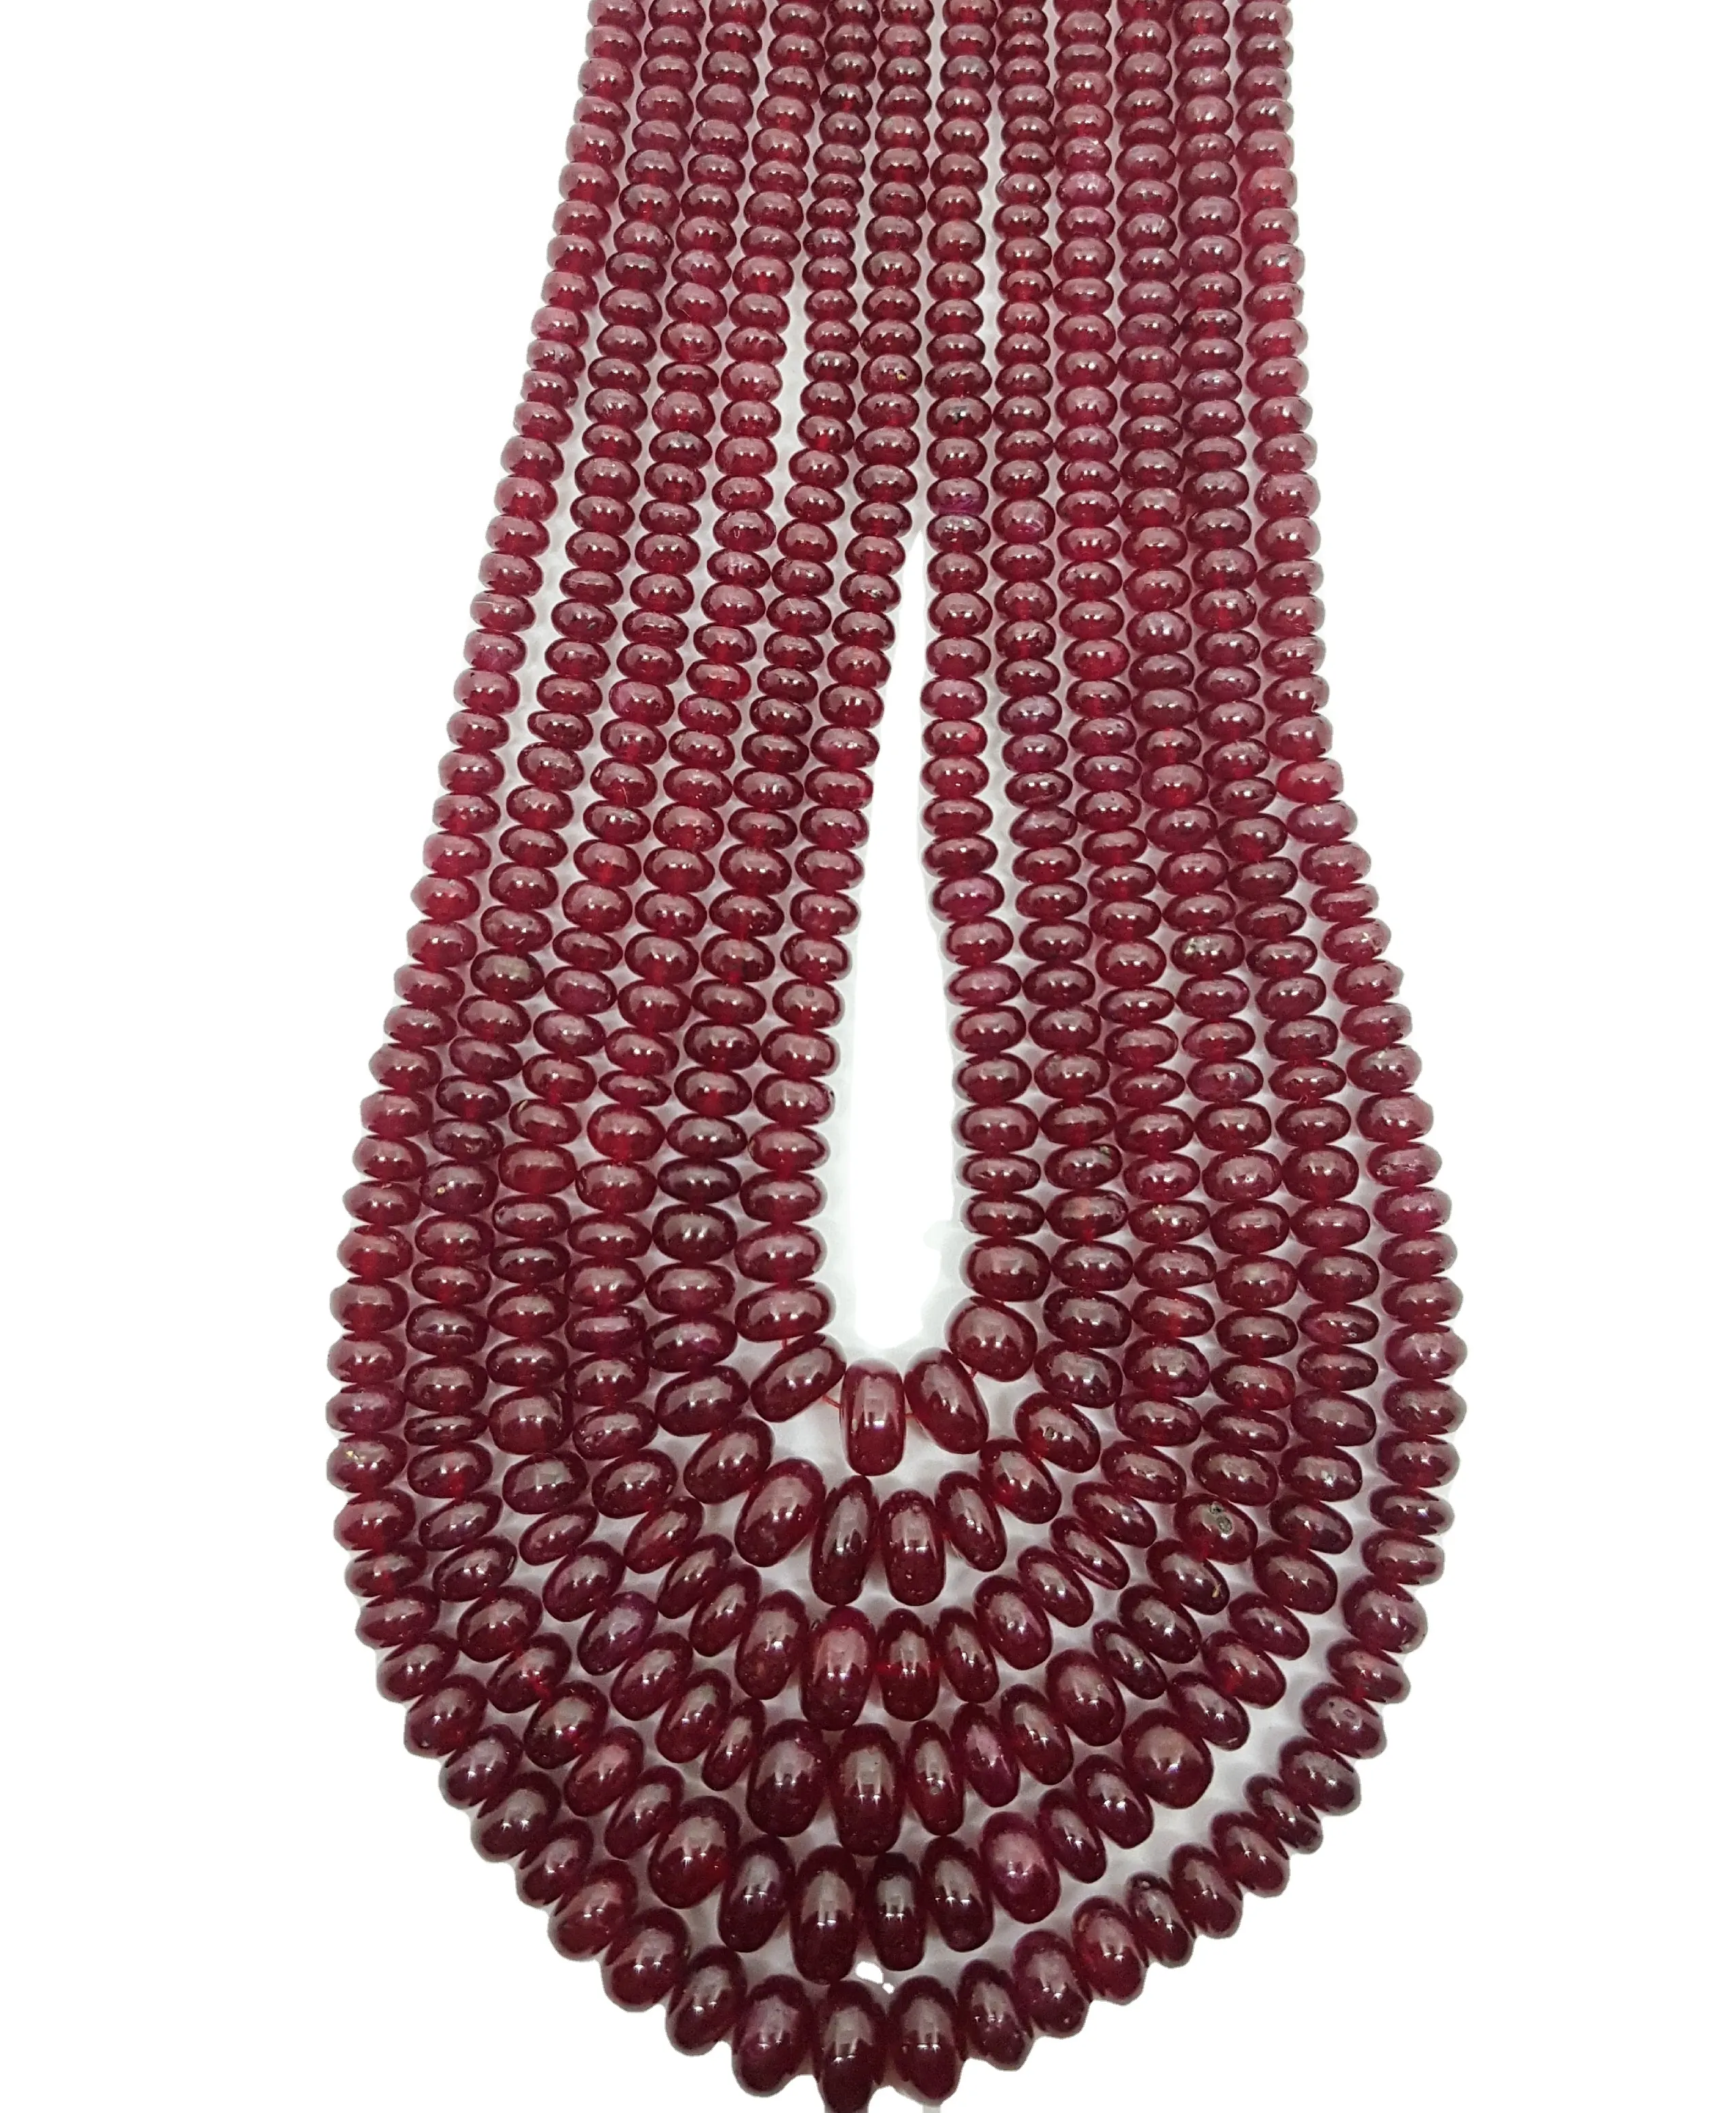 Natural ruby beads 3-5 mm plain fine polished red blood color for necklace and jewelry making